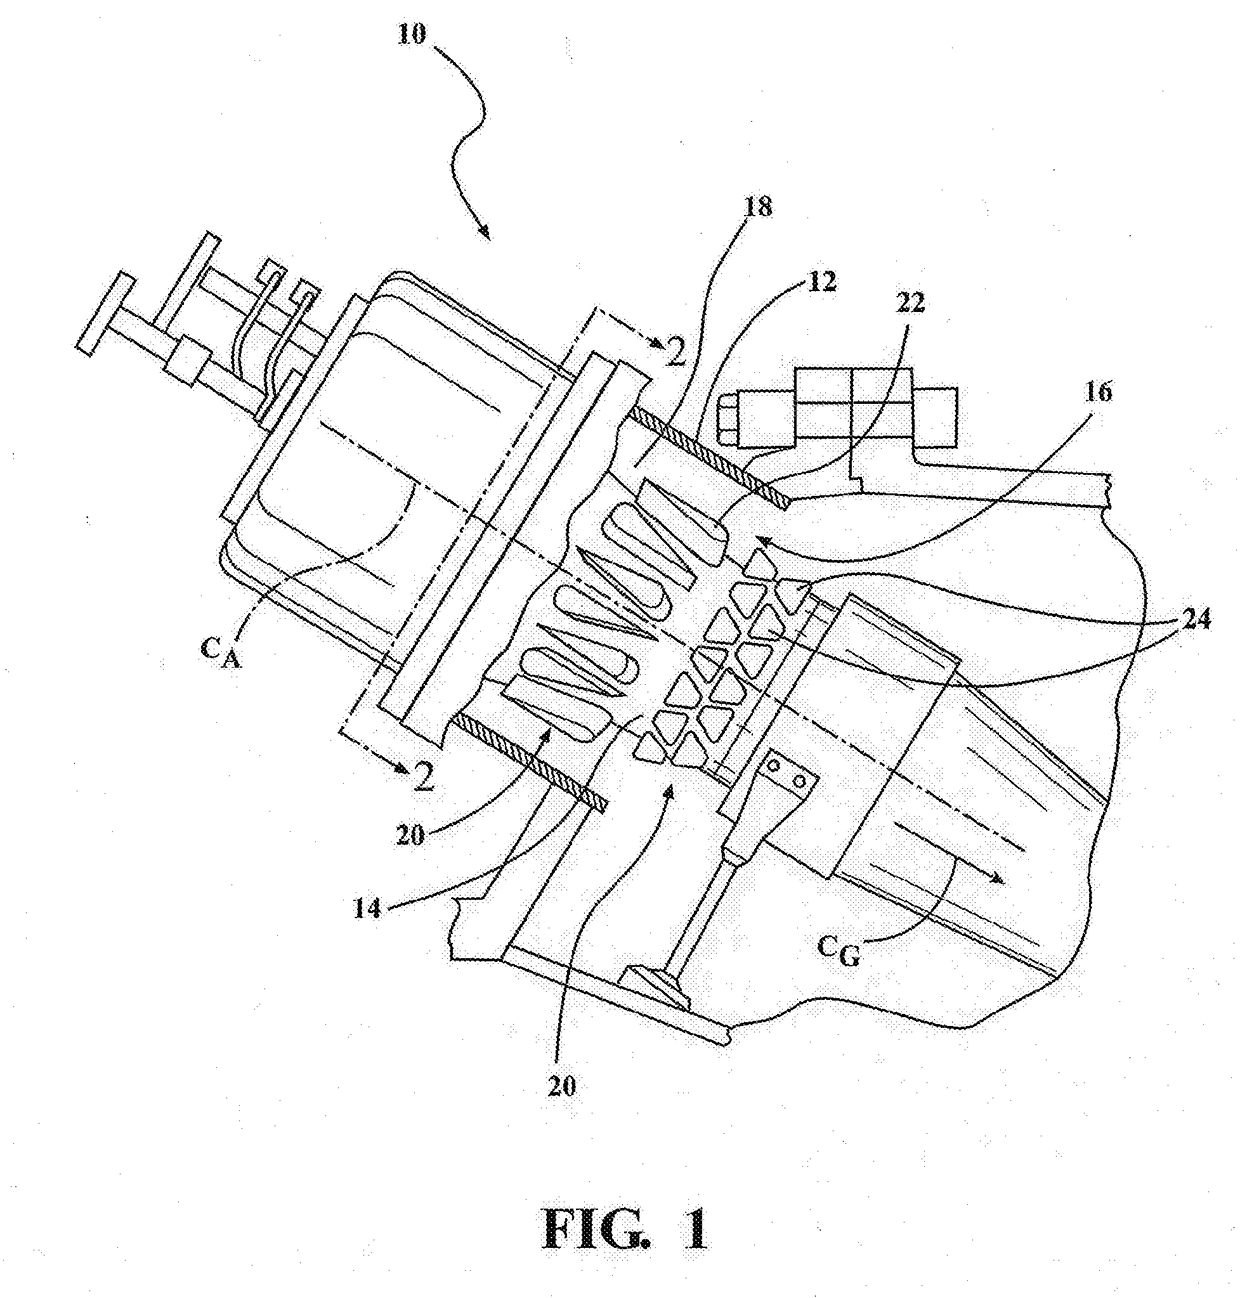 Resonators with interchangeable metering tubes for gas turbine engines